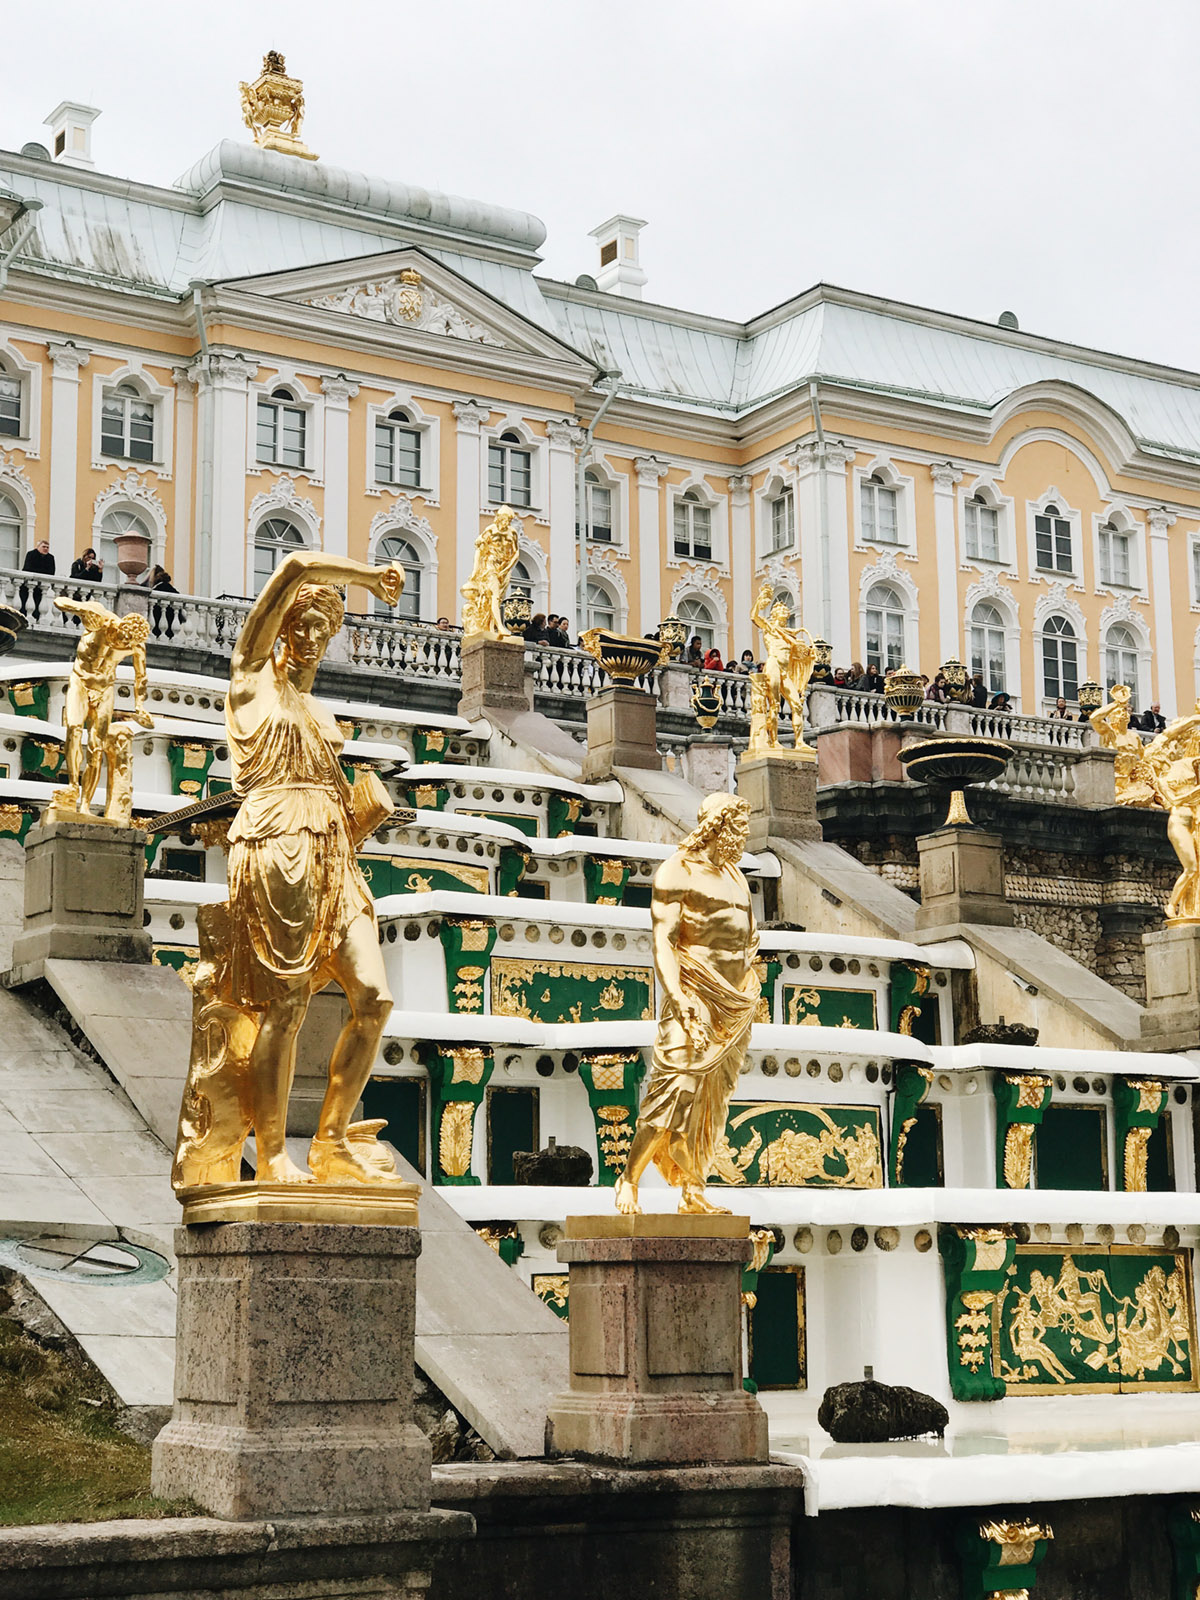 the fountain stairs at peterhof palace | travel guide to st. petersburg russia on coco kelley